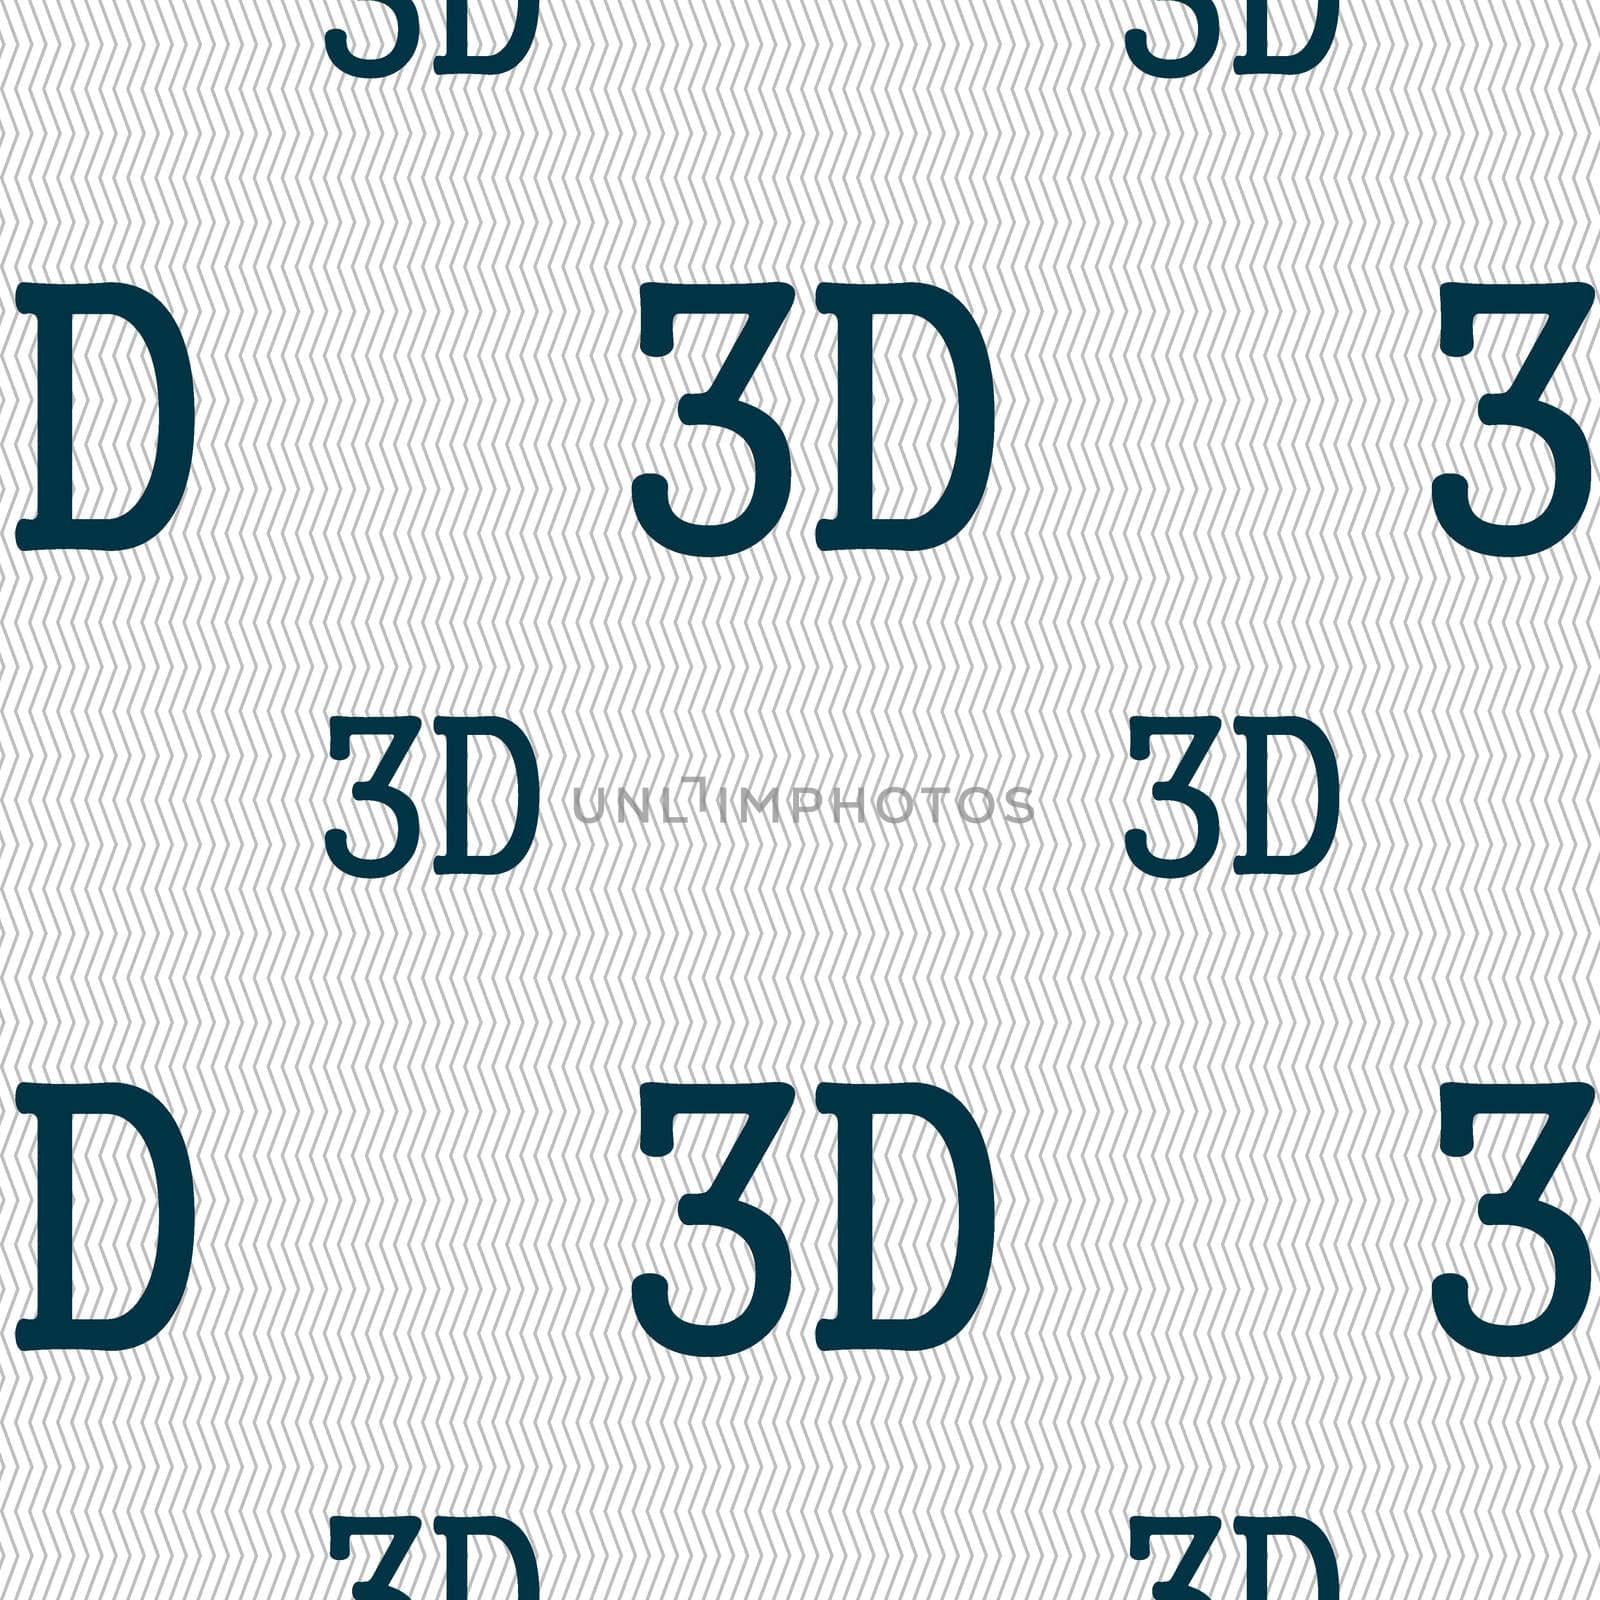 3D sign icon. 3D New technology symbol. Seamless pattern with geometric texture. illustration